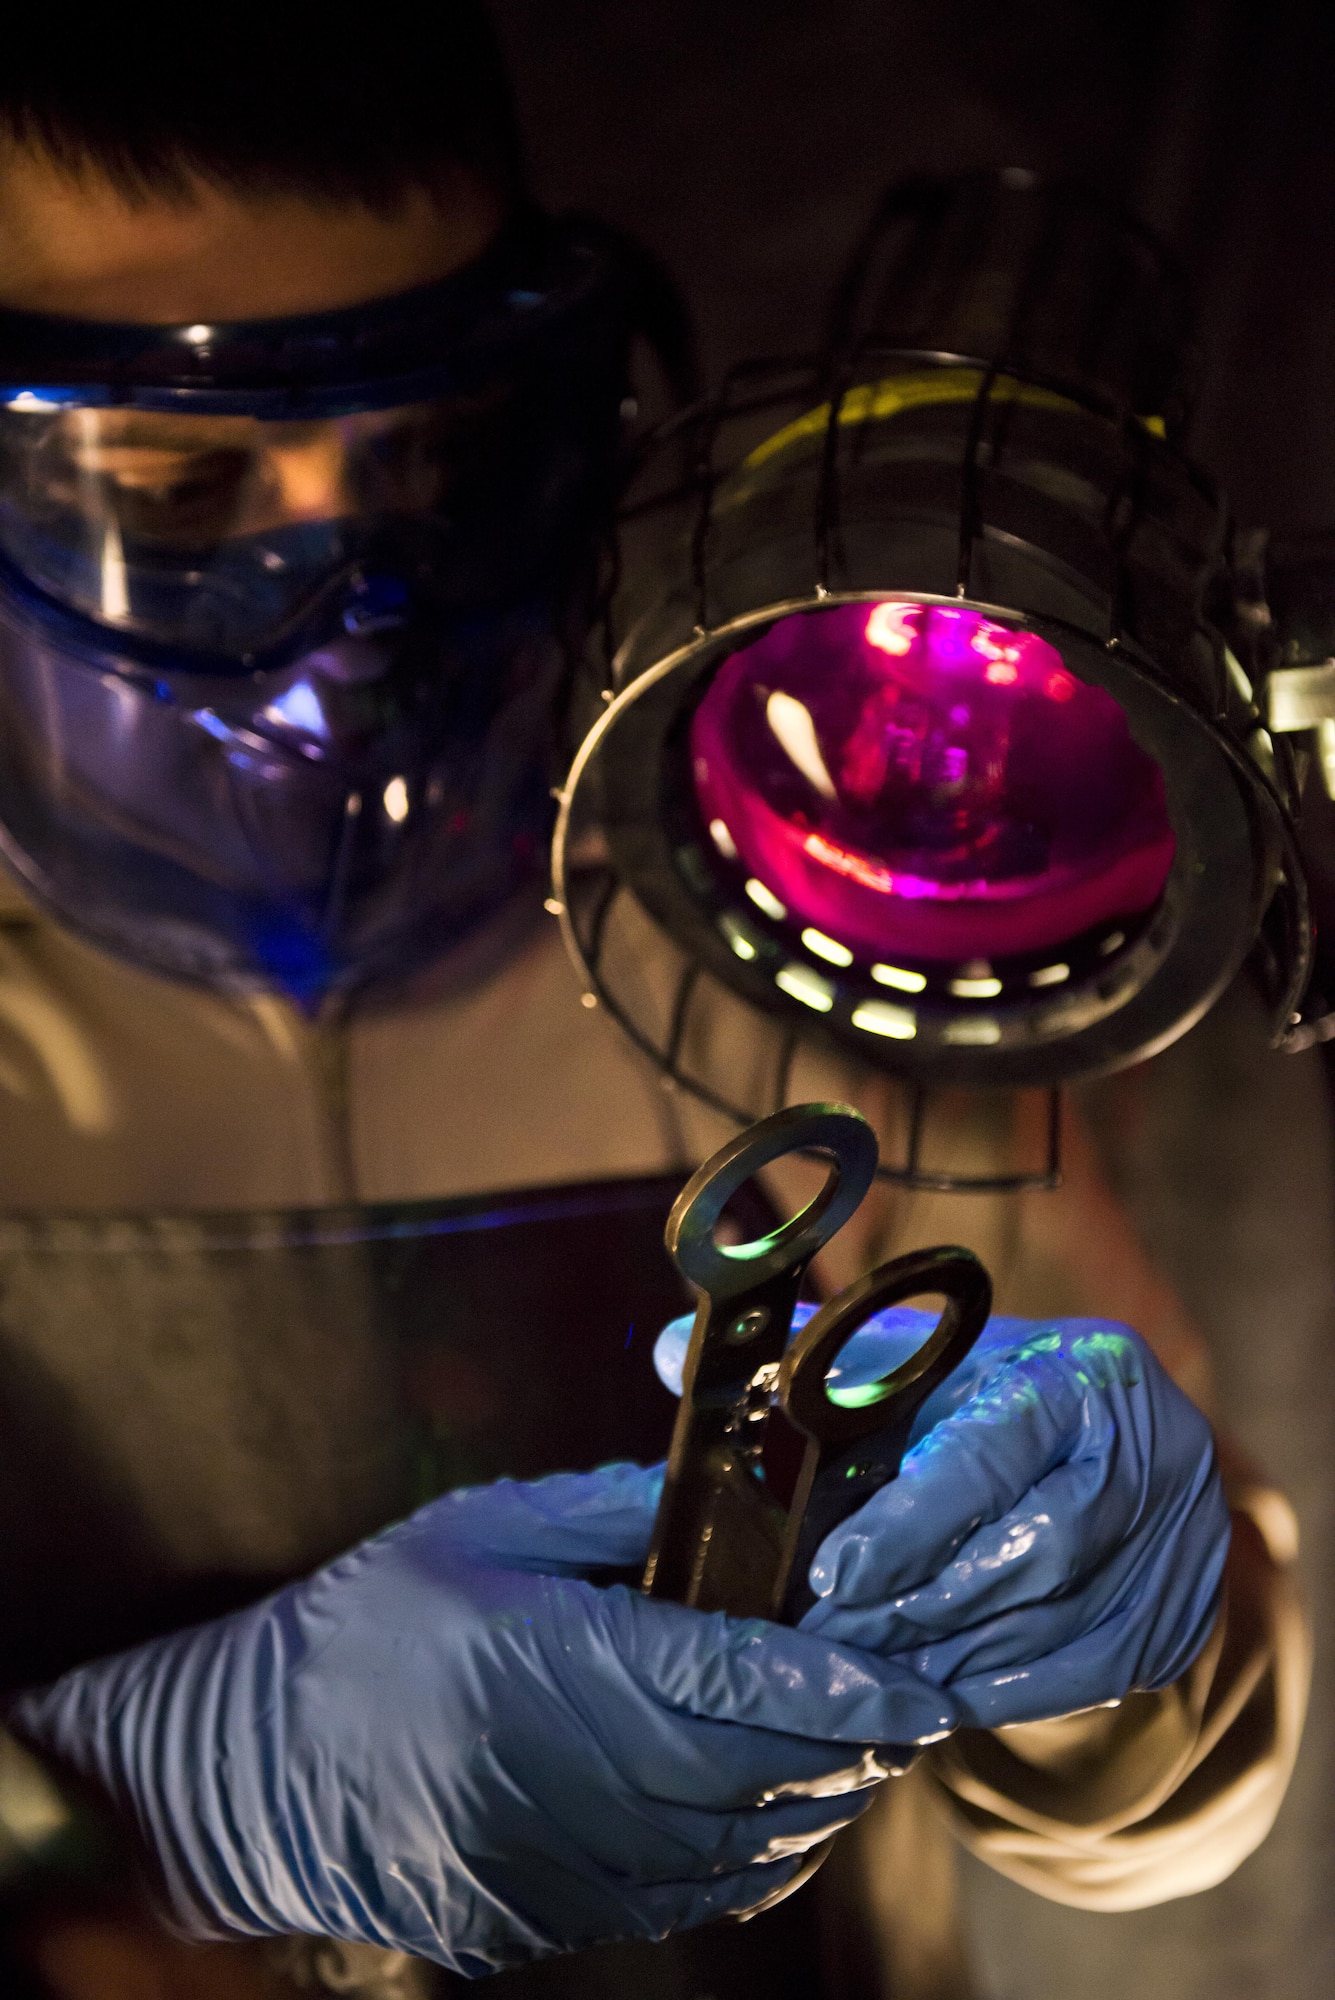 Airman 1st Class Landen Johnston, 5th Maintenance Squadron non-destructive inspection apprentice, performs a magnetic particle inspection under an ultraviolet light at Minot Air Force Base, N.D., Oct. 18, 2016. The fluorescing particles under ultraviolet light allow Airmen to easily locate cracks and imperfections on magnetized aircraft parts. (U.S. Air Force photo/Airman 1st Class J.T. Armstrong)